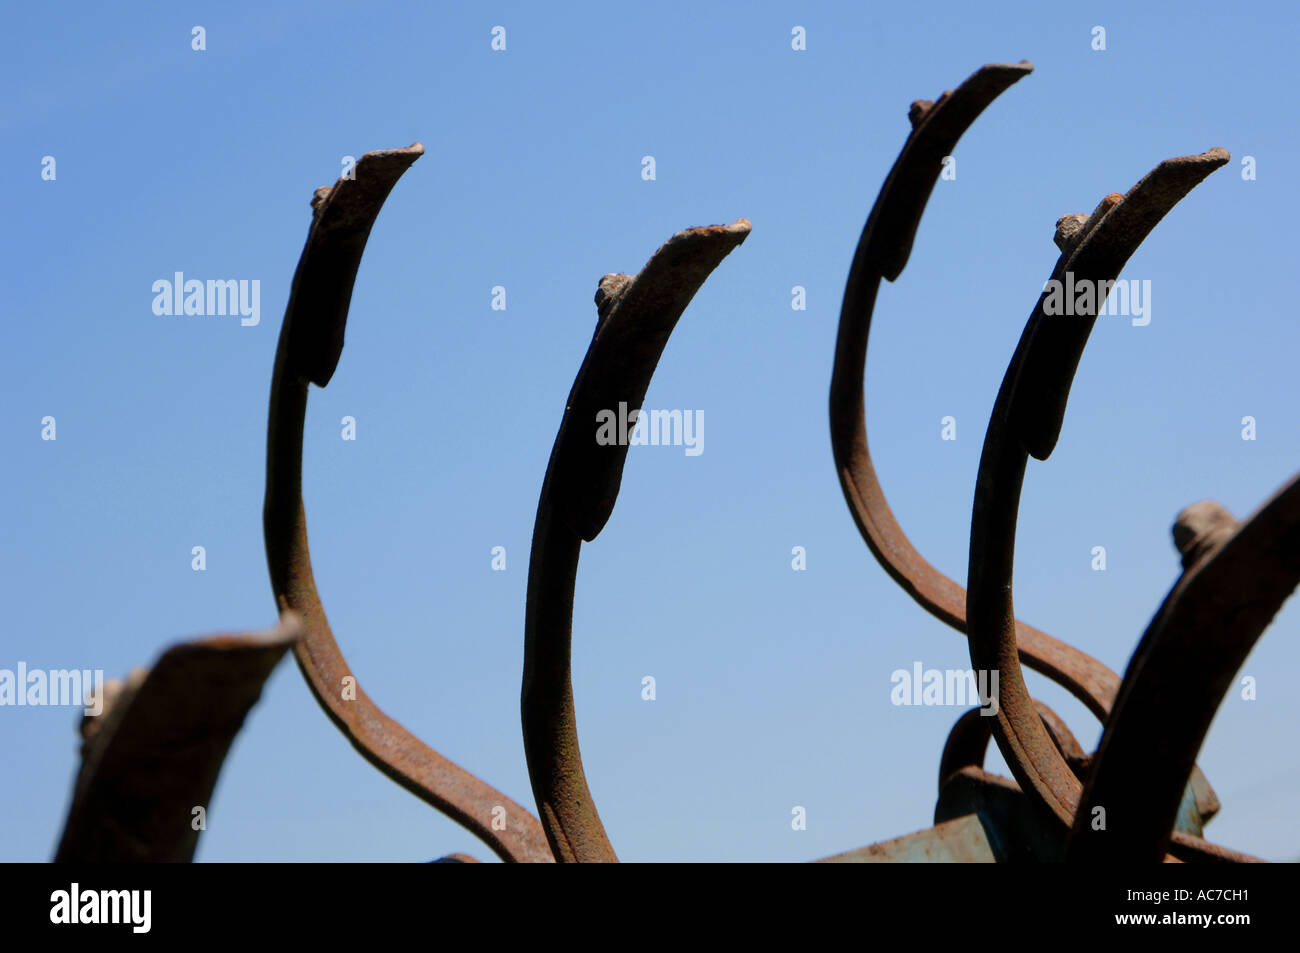 Old farm machinery makes a pattern like clawed fingers against a blue summer sky Stock Photo